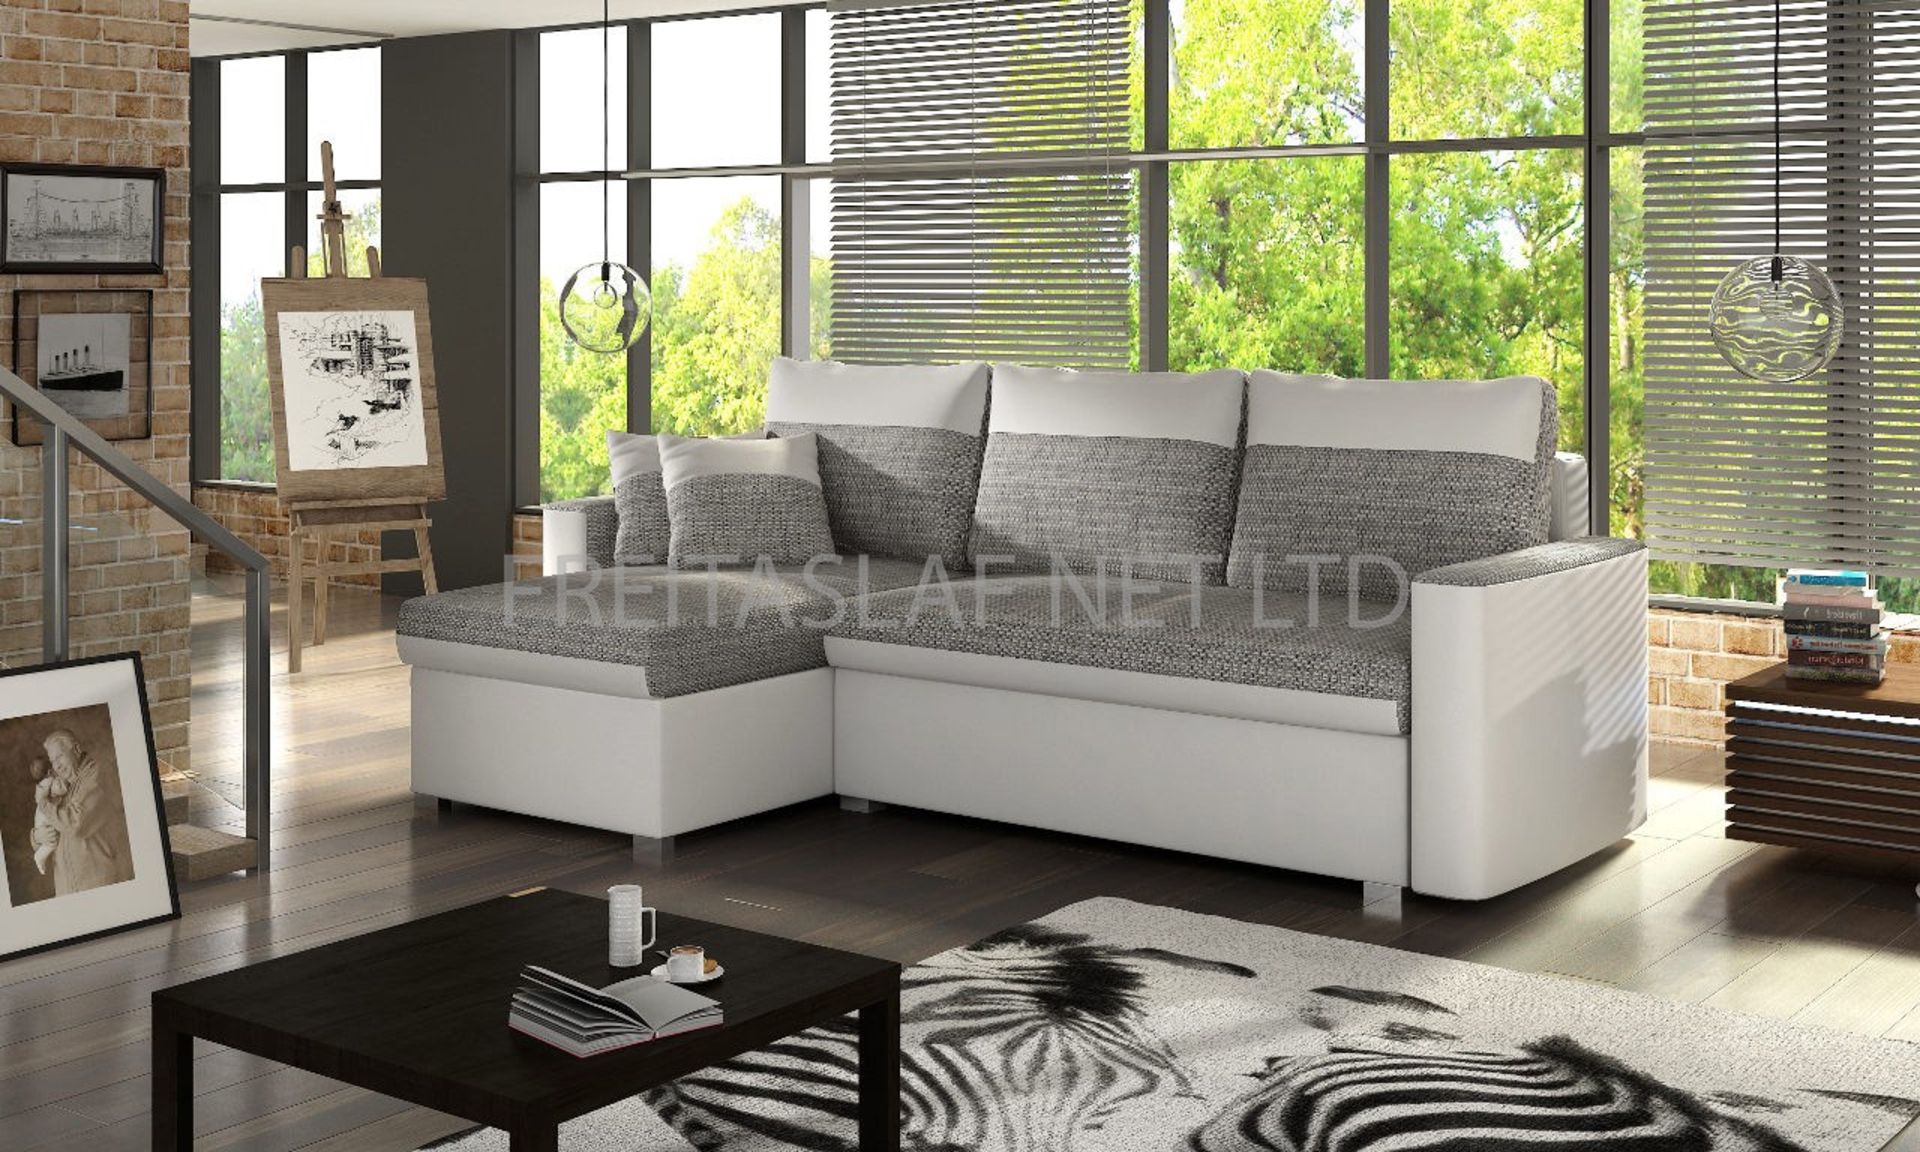 Brand New Flˆvio Right Hand Facing White/Grey Corner Pull Out Sofa Bed With Storage